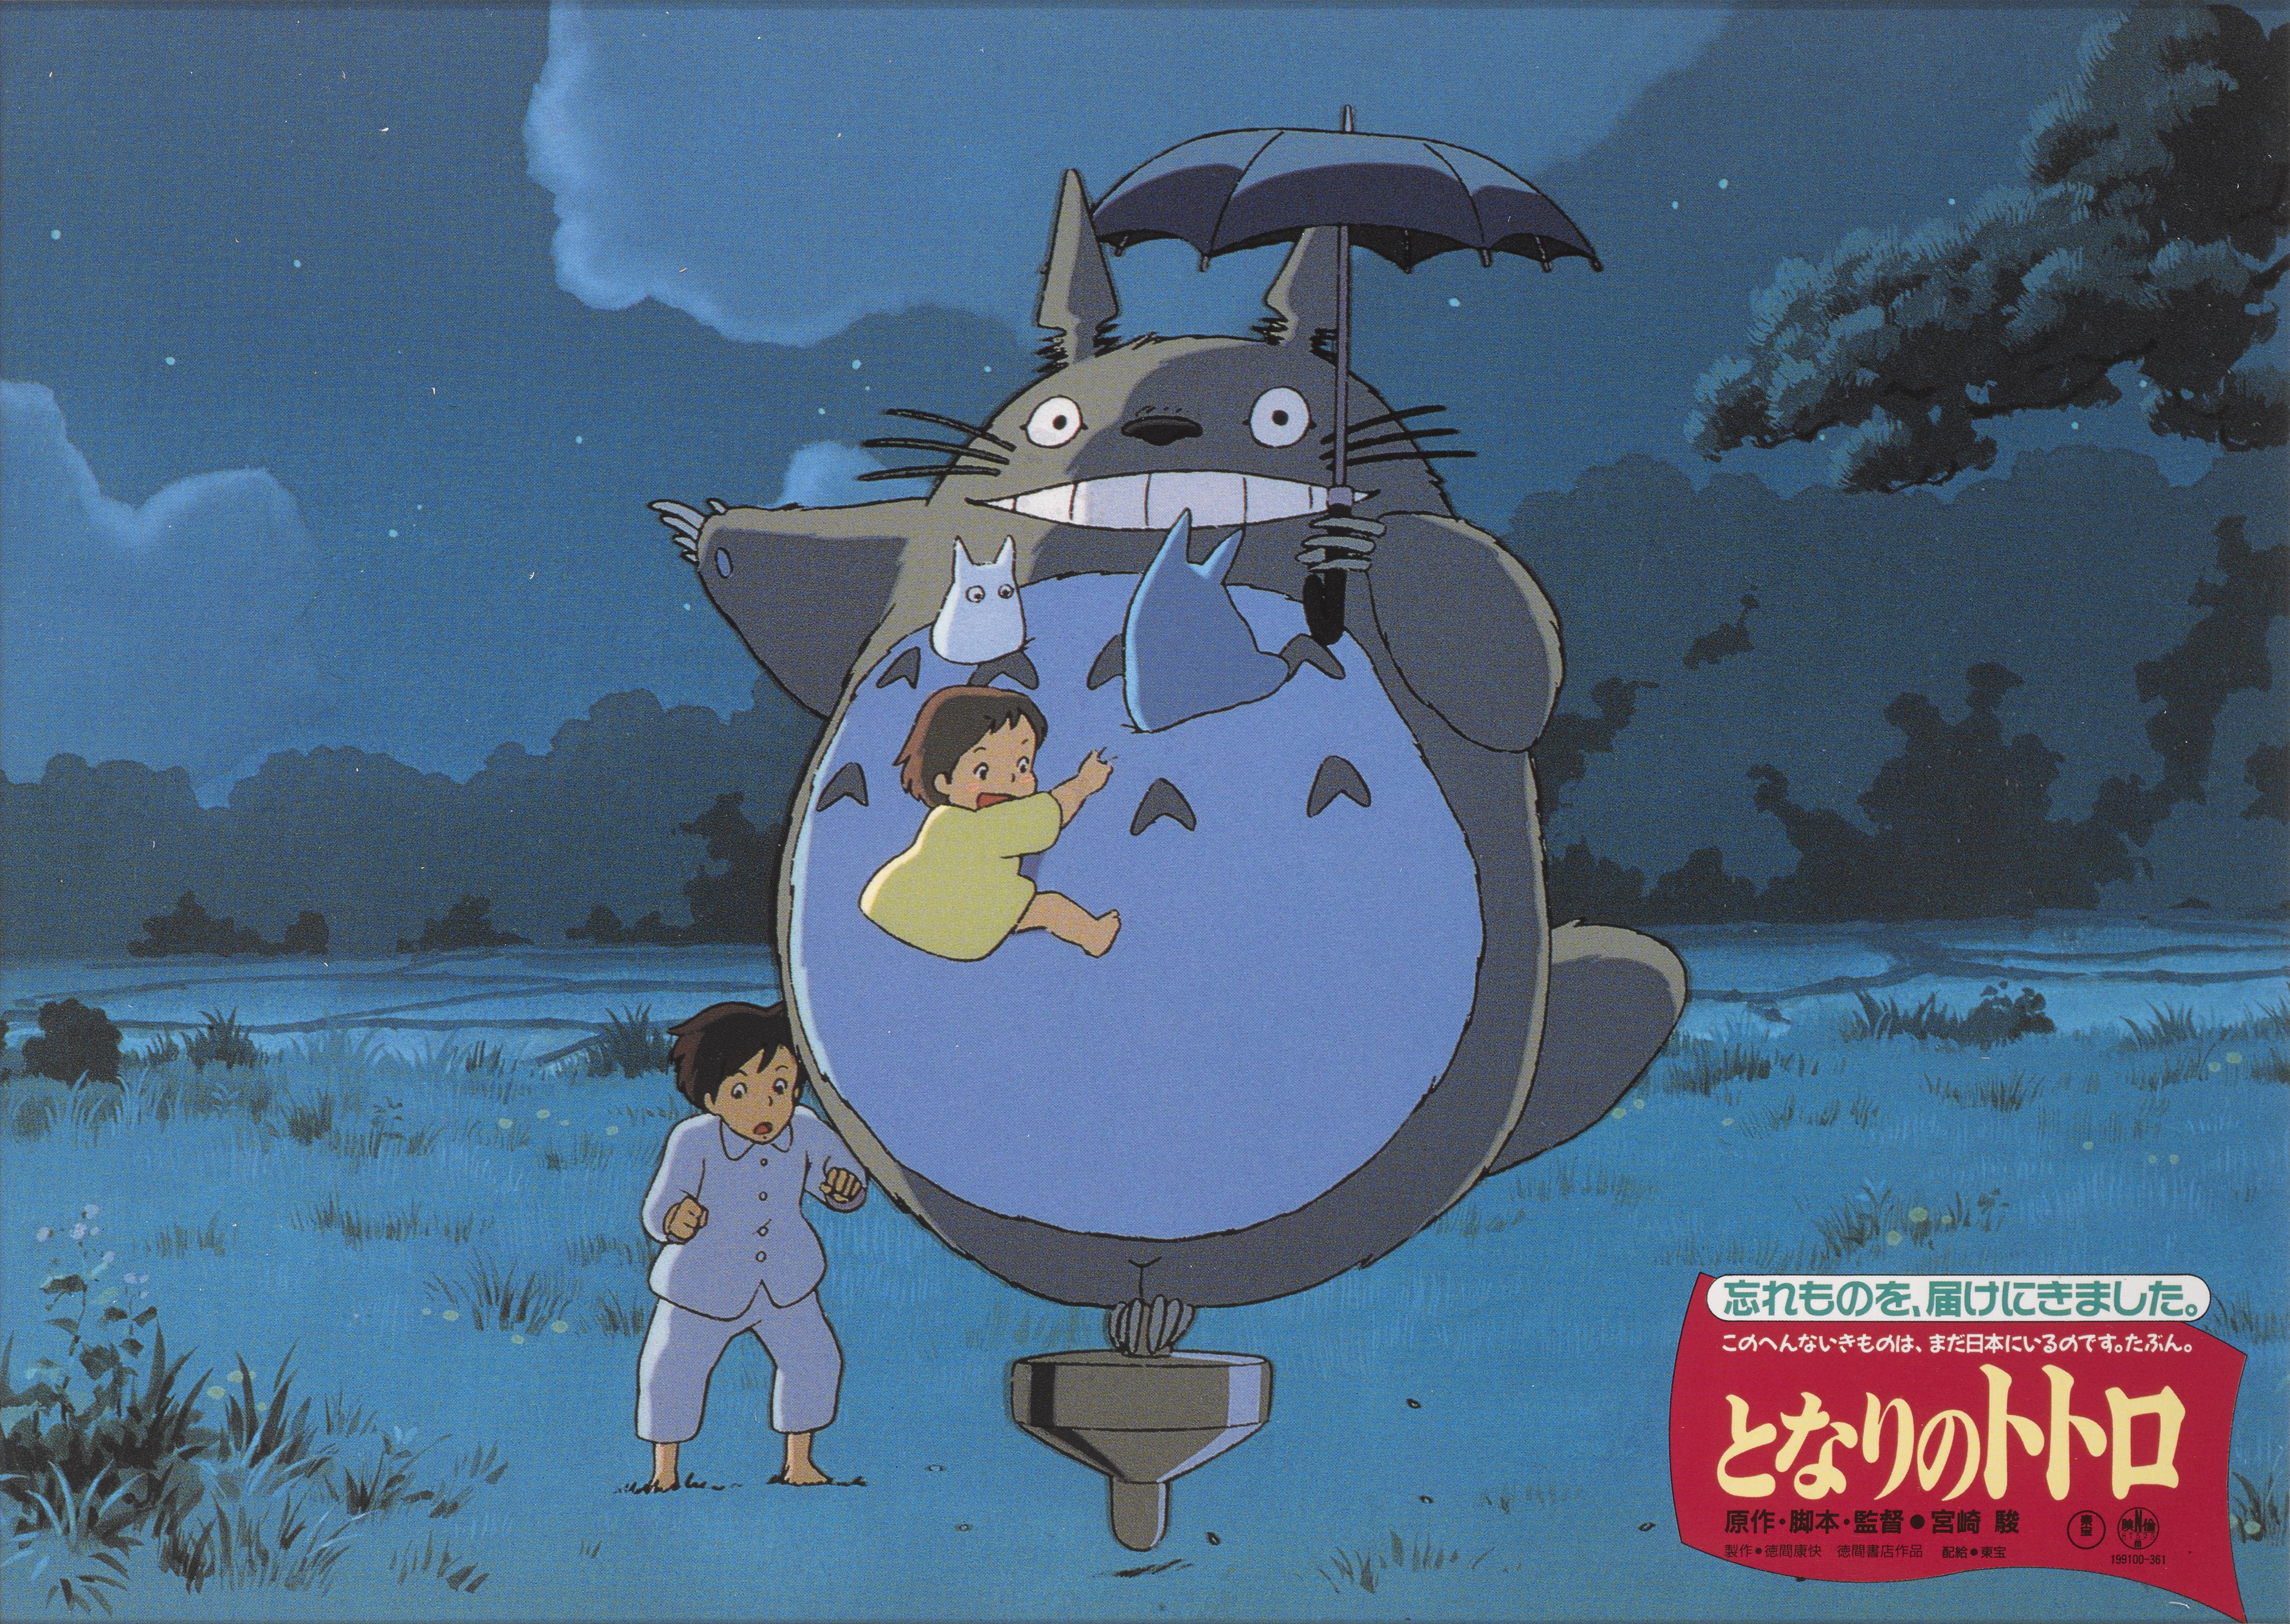 Original Japanese Lobby card for the 1988 studio Ghibli animation.
Hayao Miyazaki, one of the founders of Studio Ghibli, wrote and directed this film. Studio Ghibli, which was founded in 1985, has been responsible for making so many magical